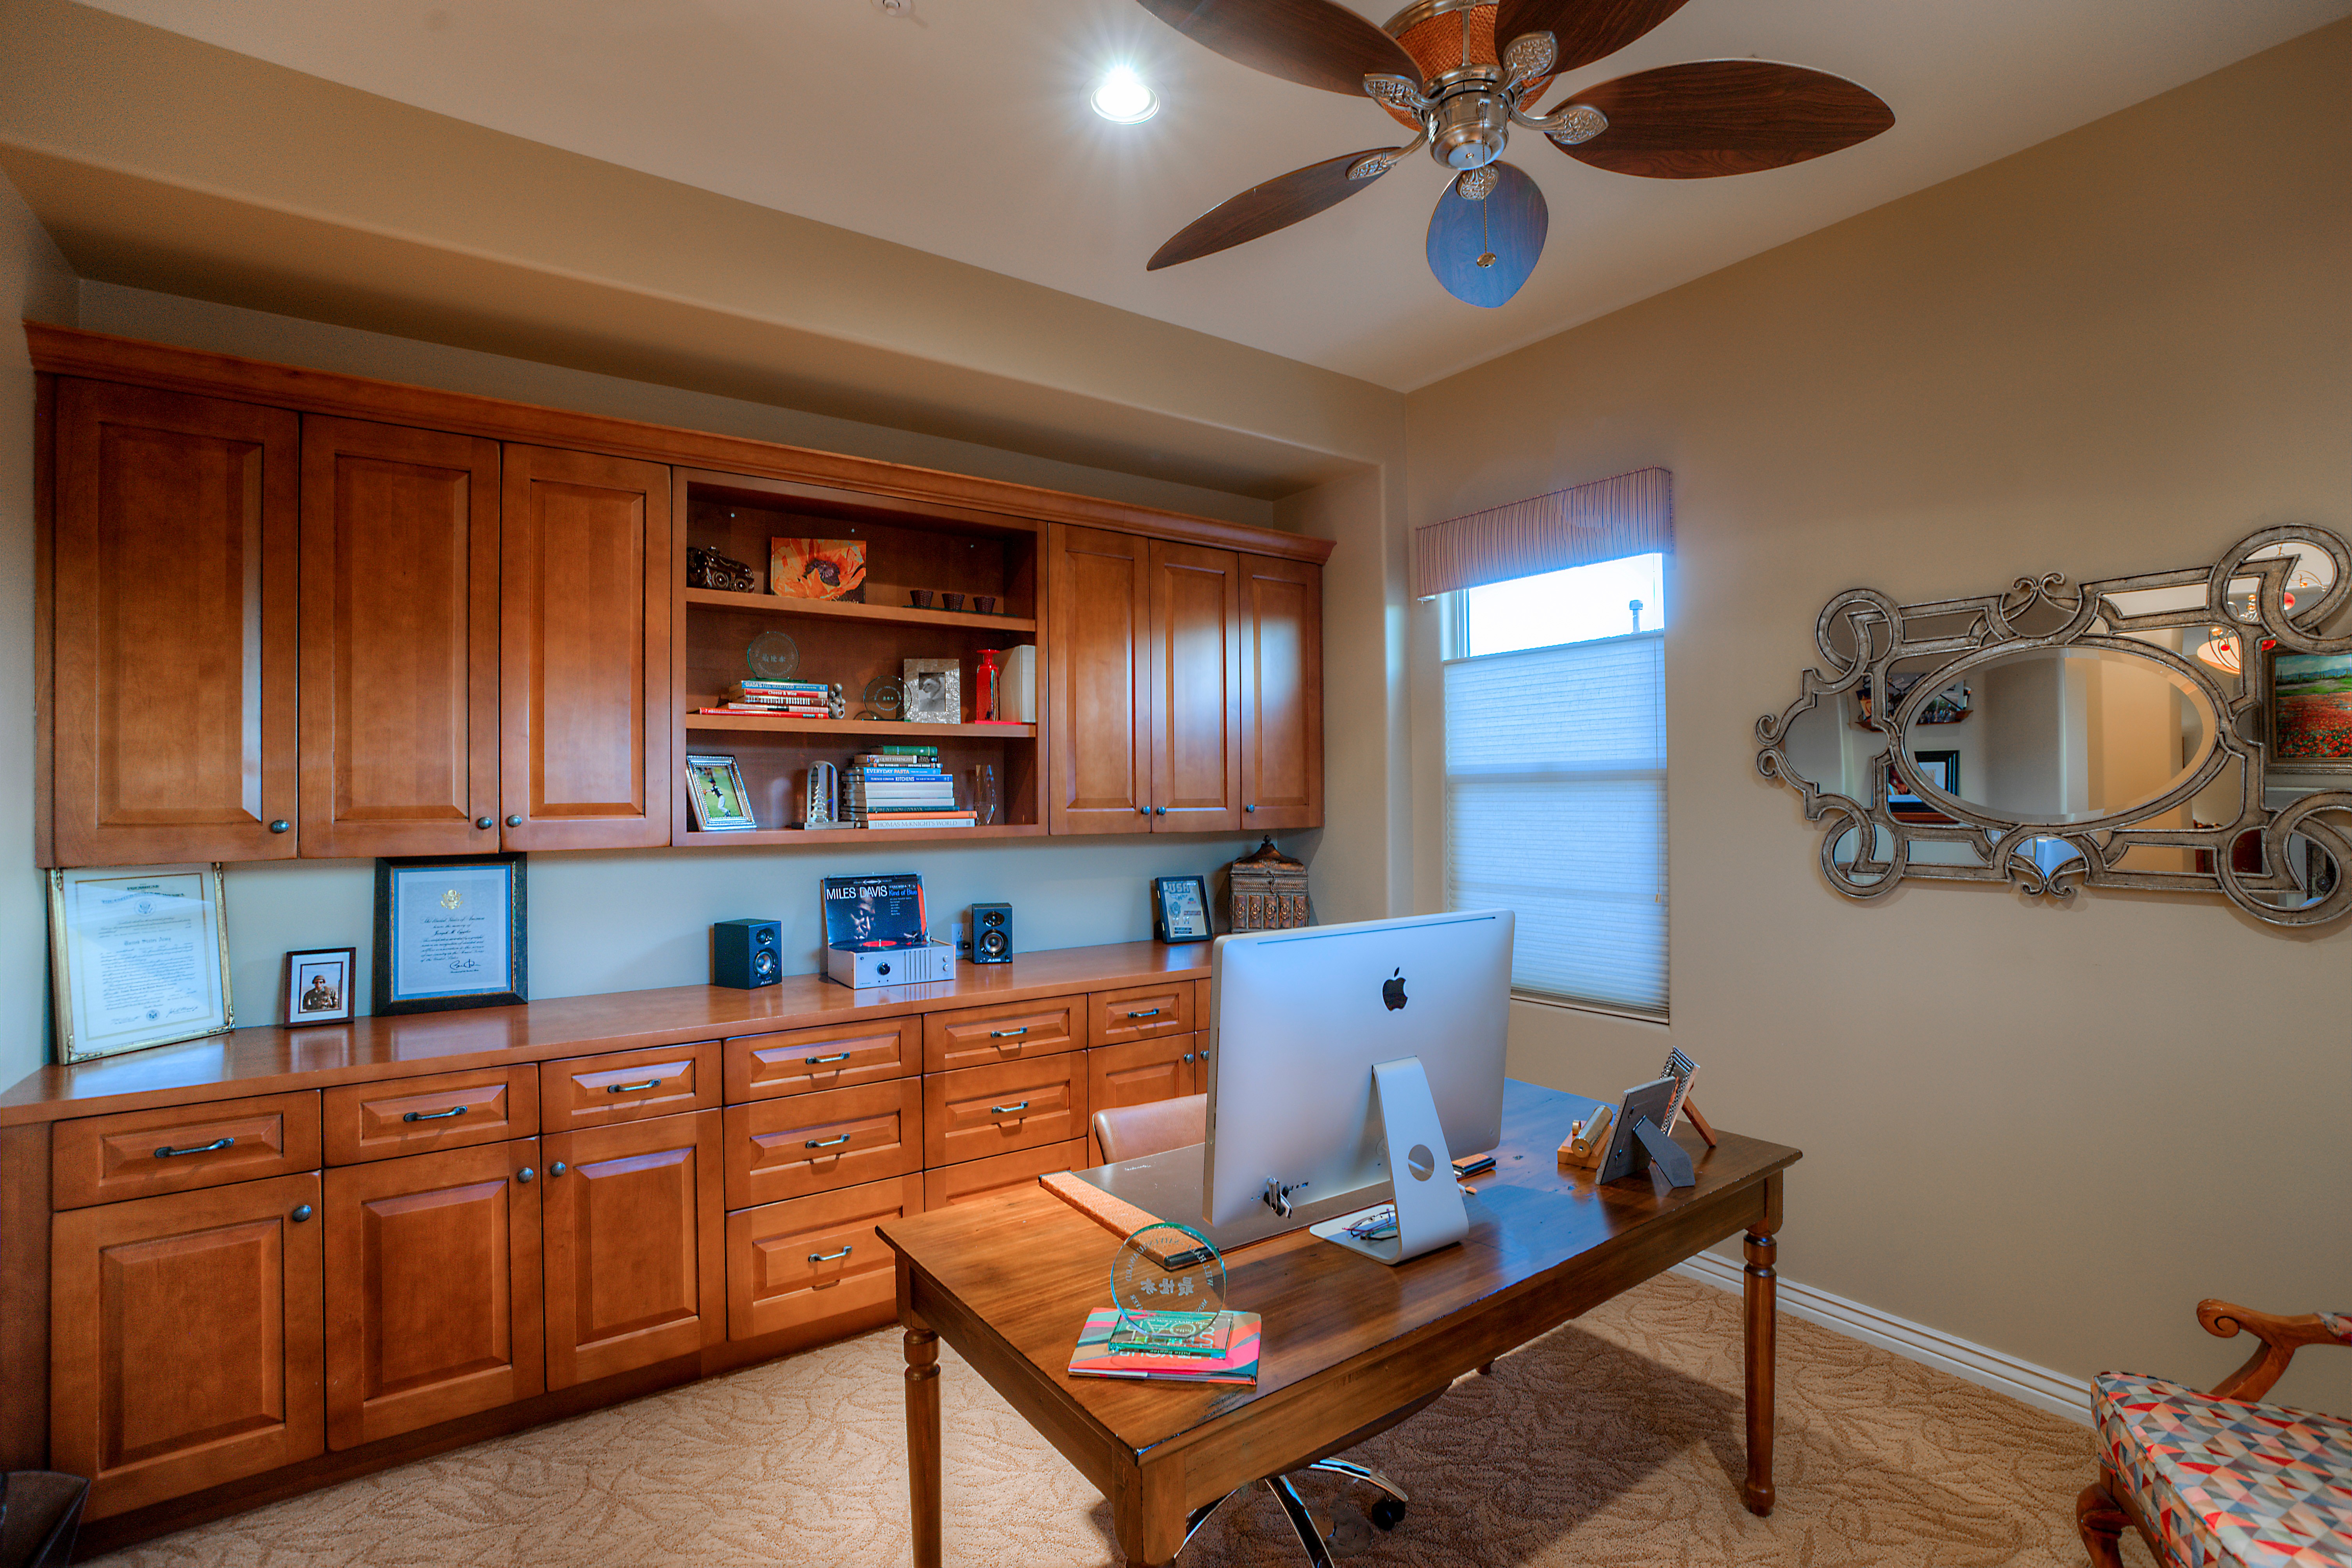 Office with built-in storage at this Scottsdale home for sale in DC Ranch located at 19829 N 97th Pl Scottsdale, AZ 85255 listed by Don Matheson at The Matheson Team